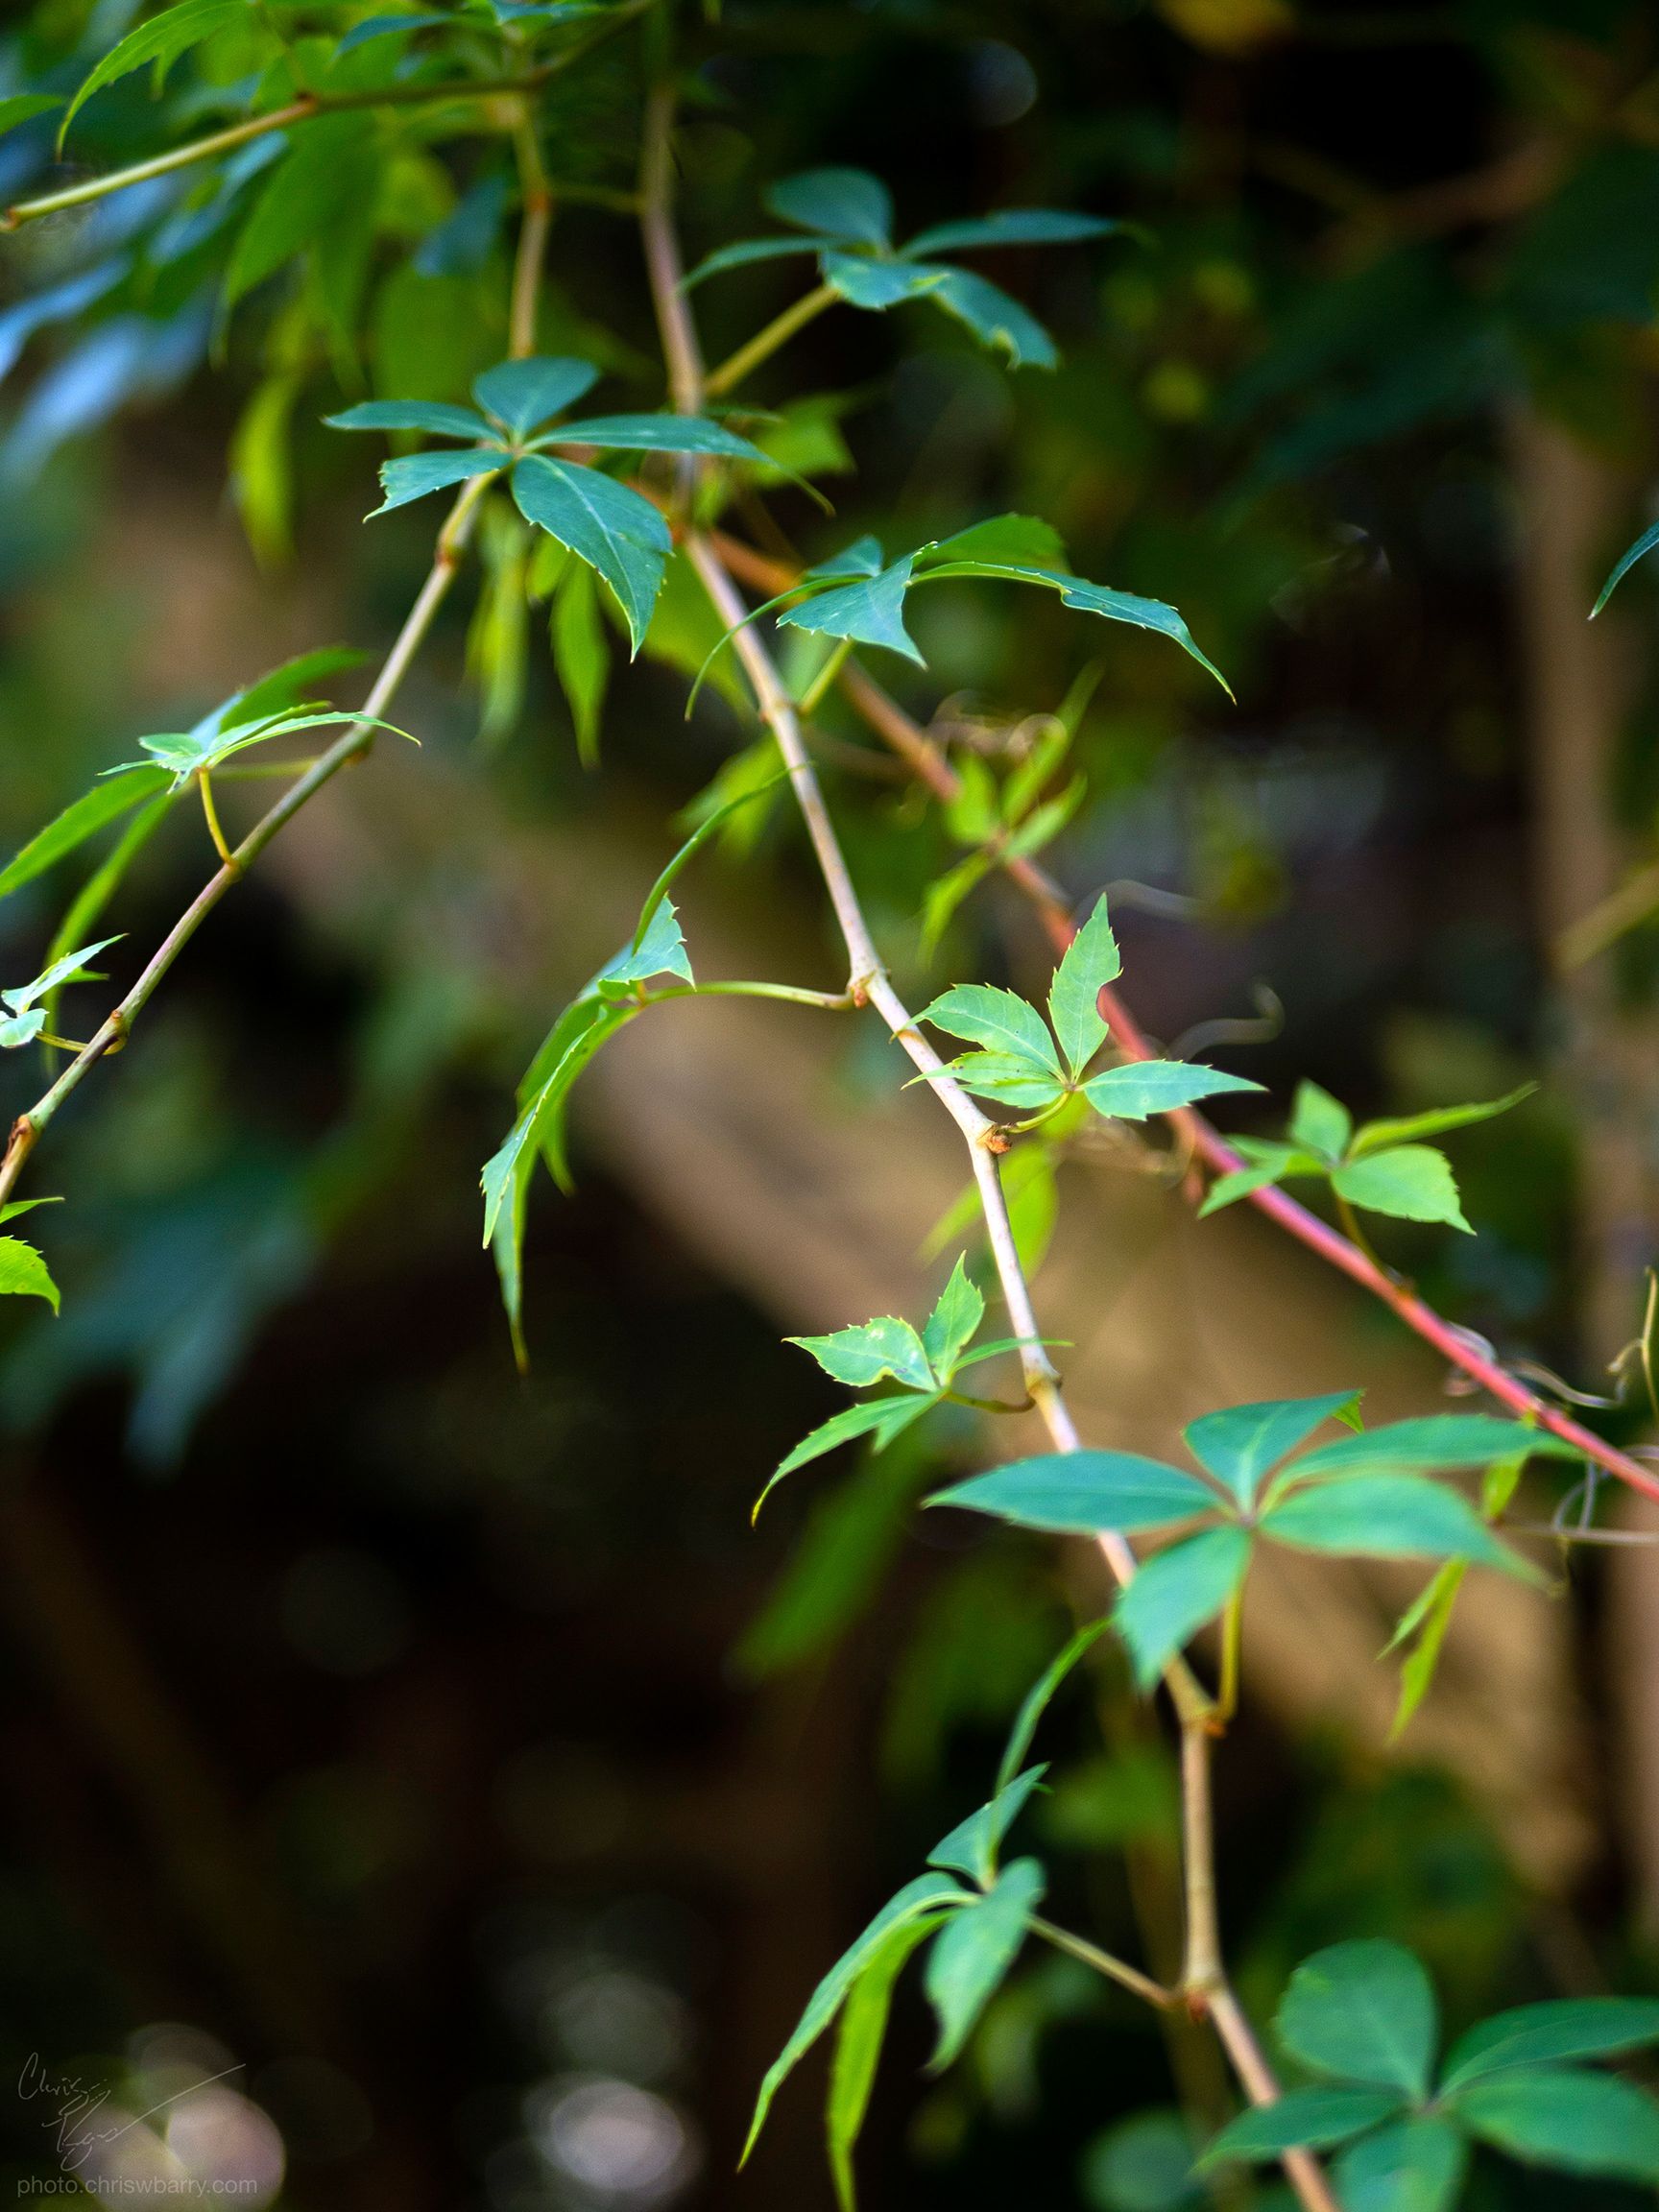 Virginia Creeper vine with a dark, out of focus background